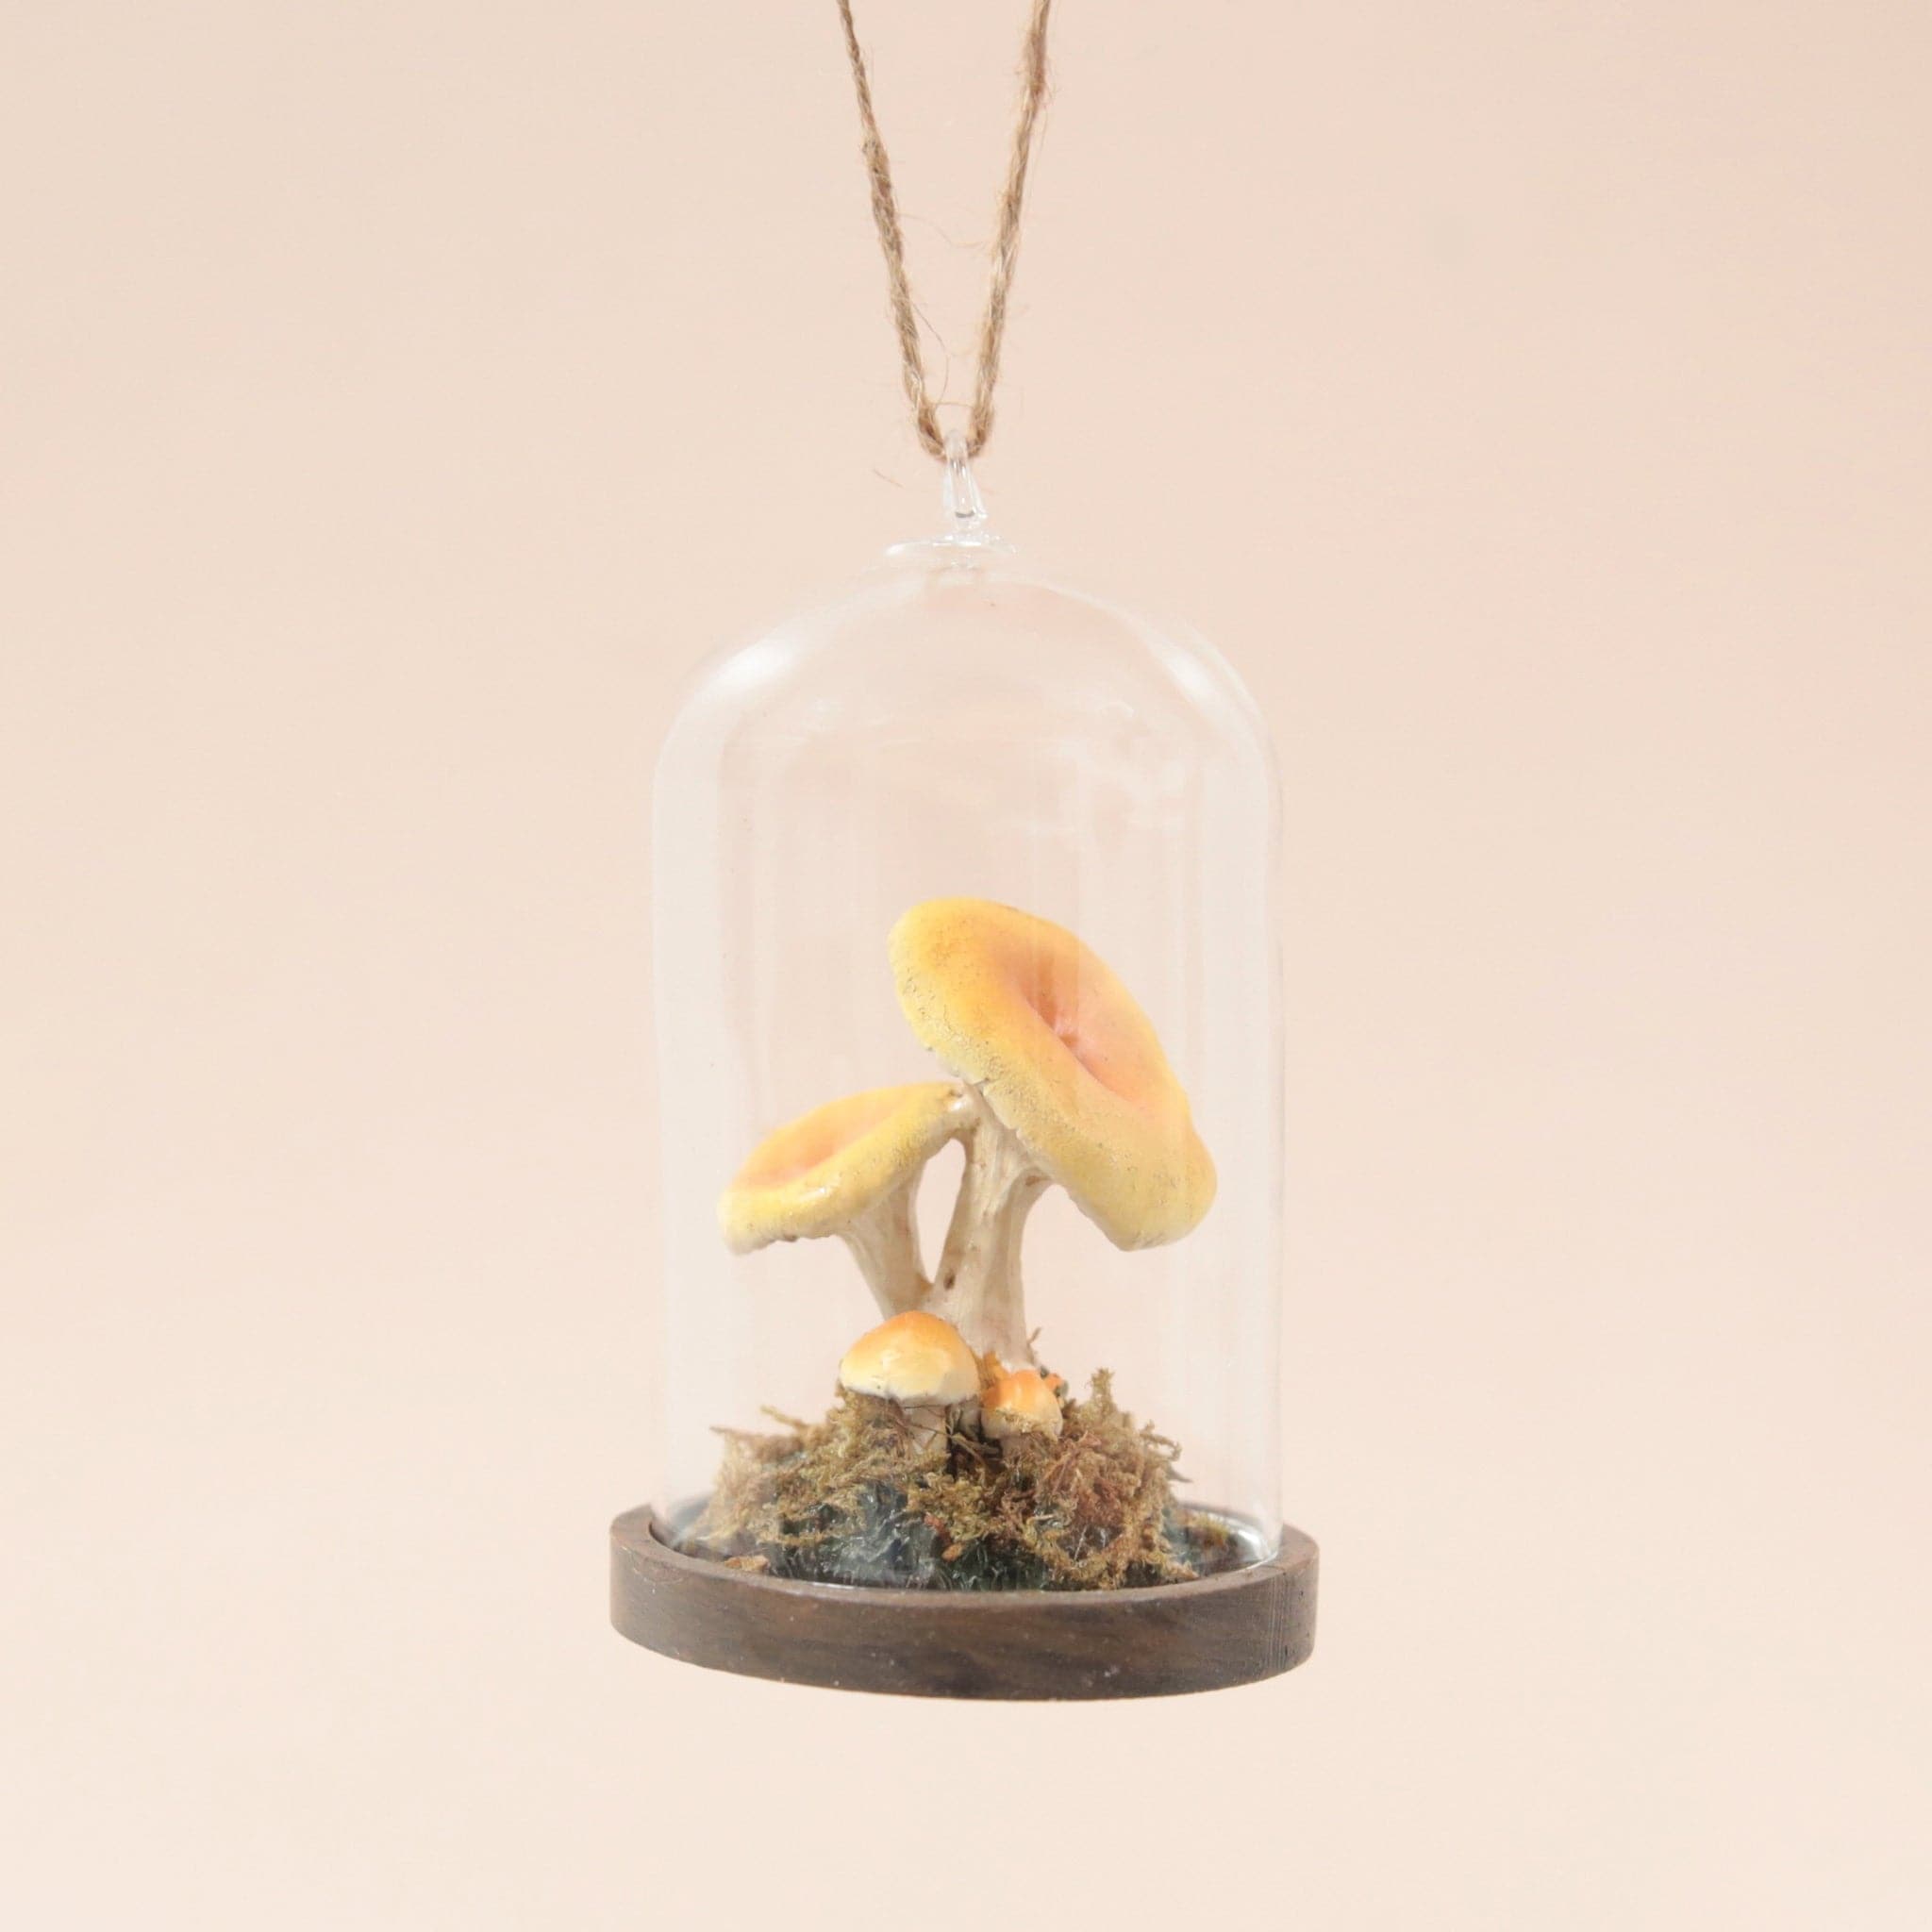 This mushroom ornament features three mushrooms of different sizes with a yellowy/tan top, placed in a glass dome cloche with a wooden base and moss covering the bottom.